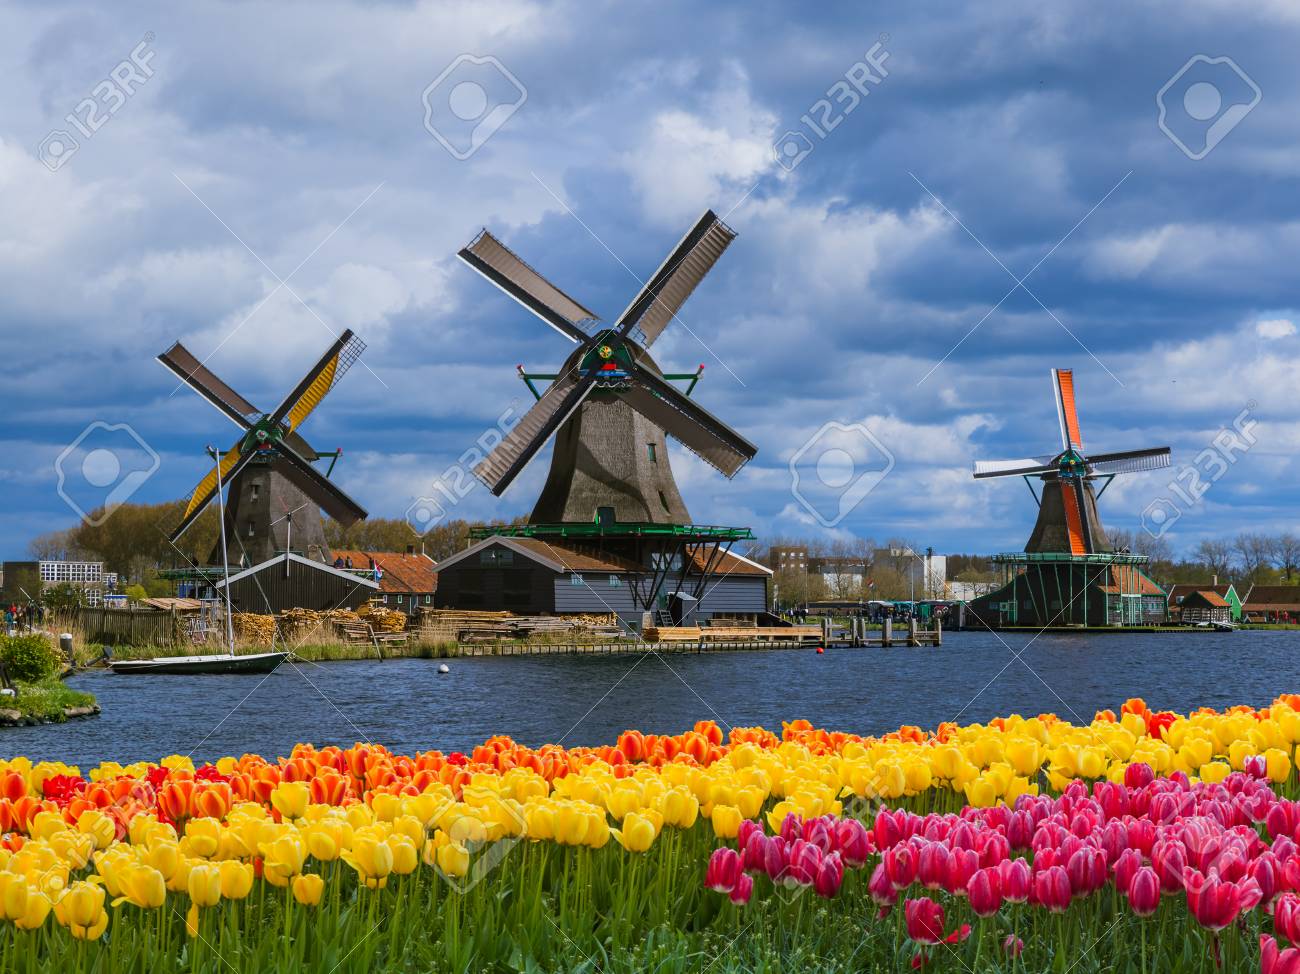 Windmills And Flowers In Herlands Architecture Background